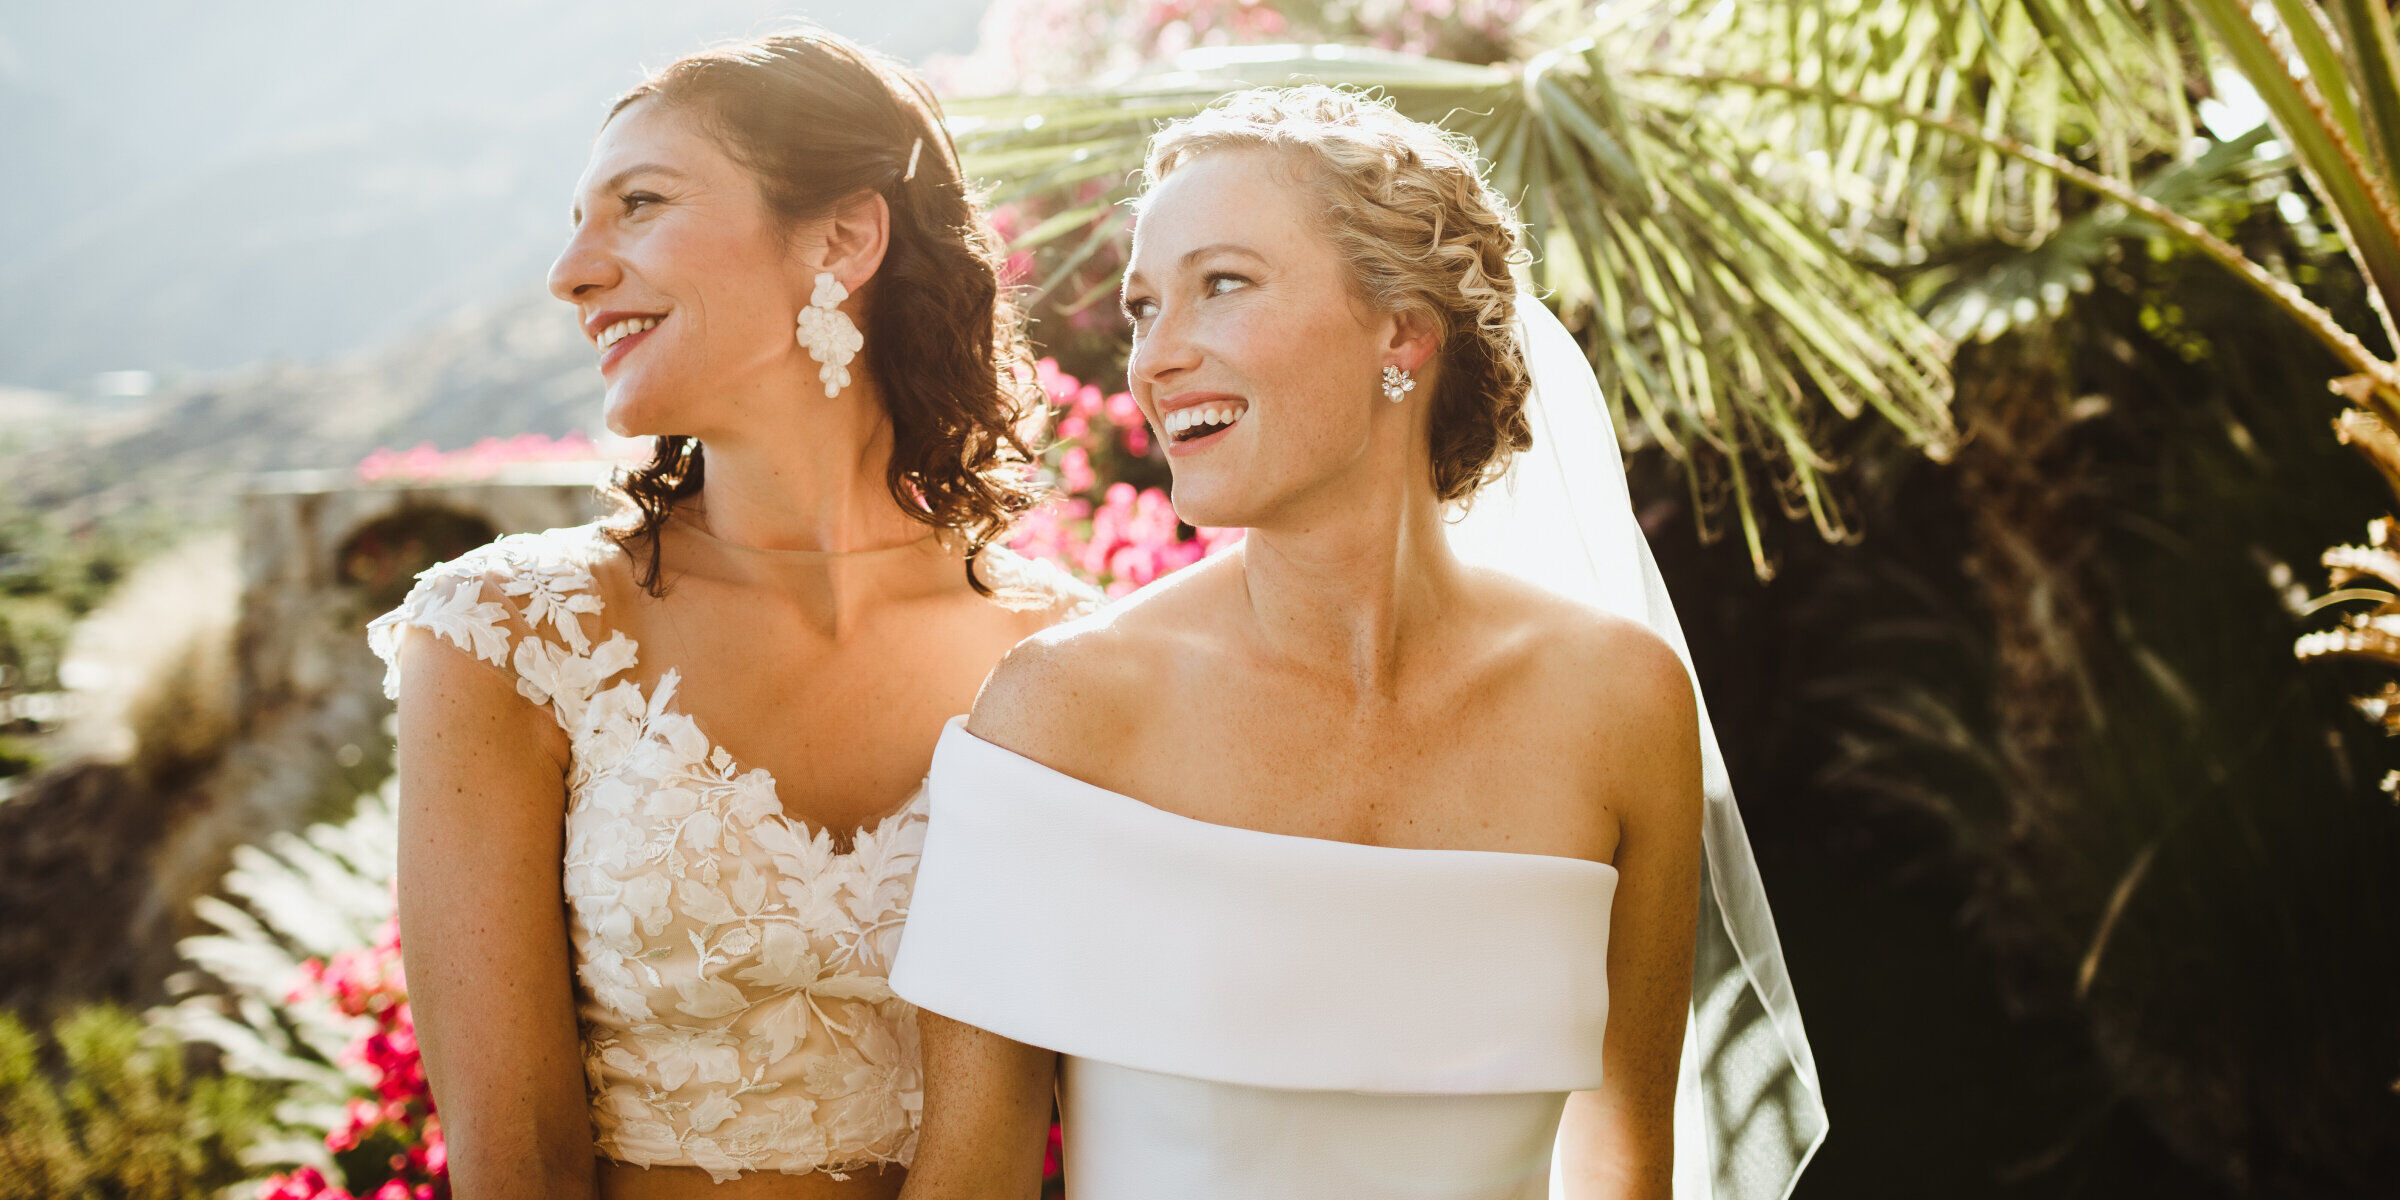 Pink Wedding: Two brides looking away and smiling on their wedding day.